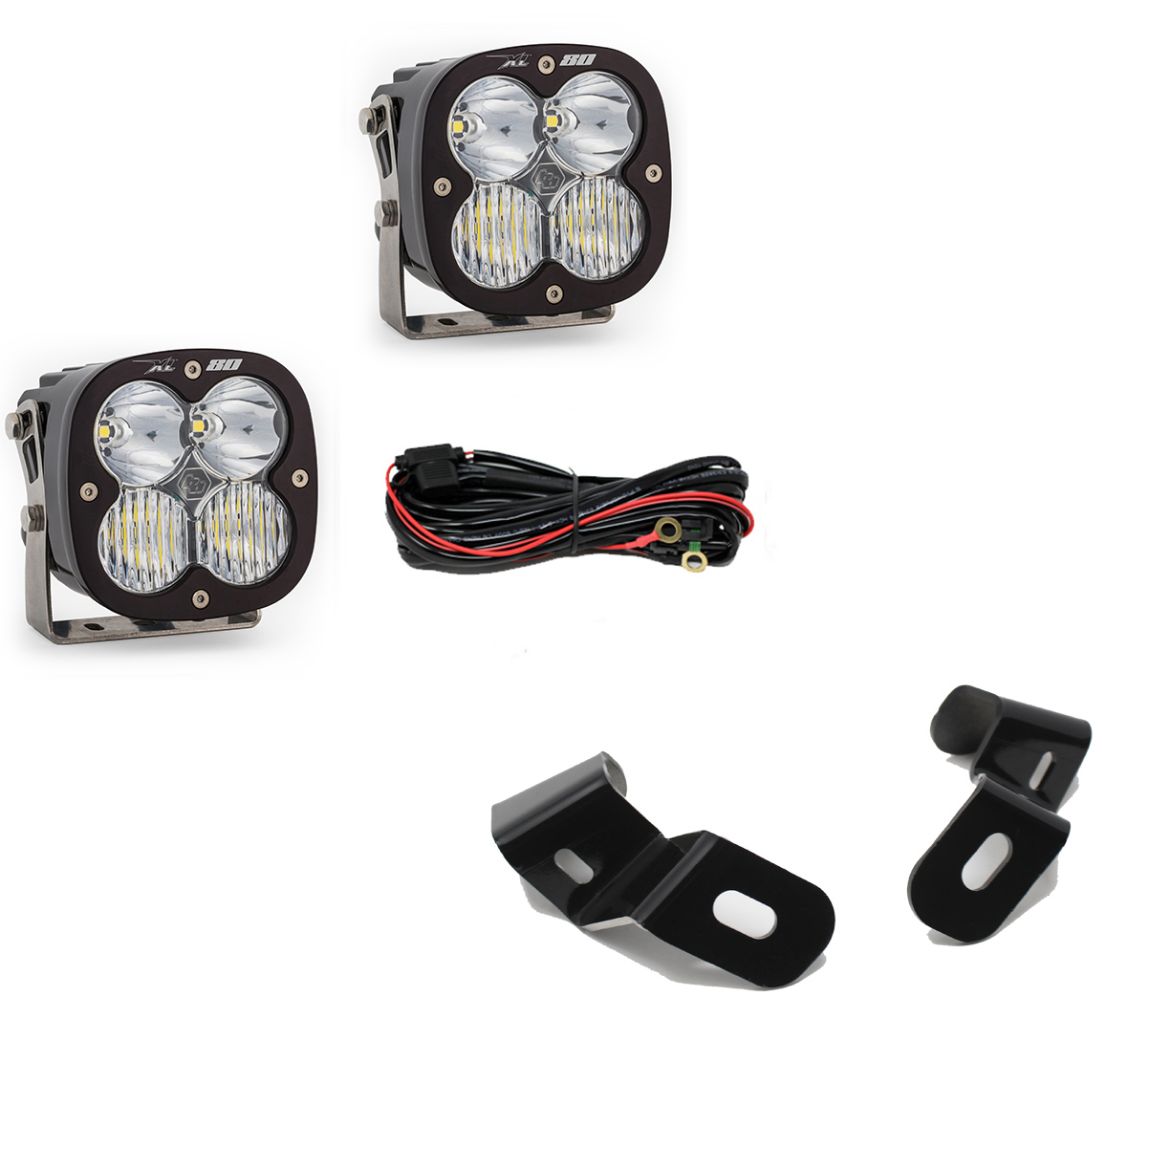 Picture of Dodge Ram LED Light Pods For Ram 2500/3500 19-On A-Pillar Kits XL 80 Driving Combo Baja Designs